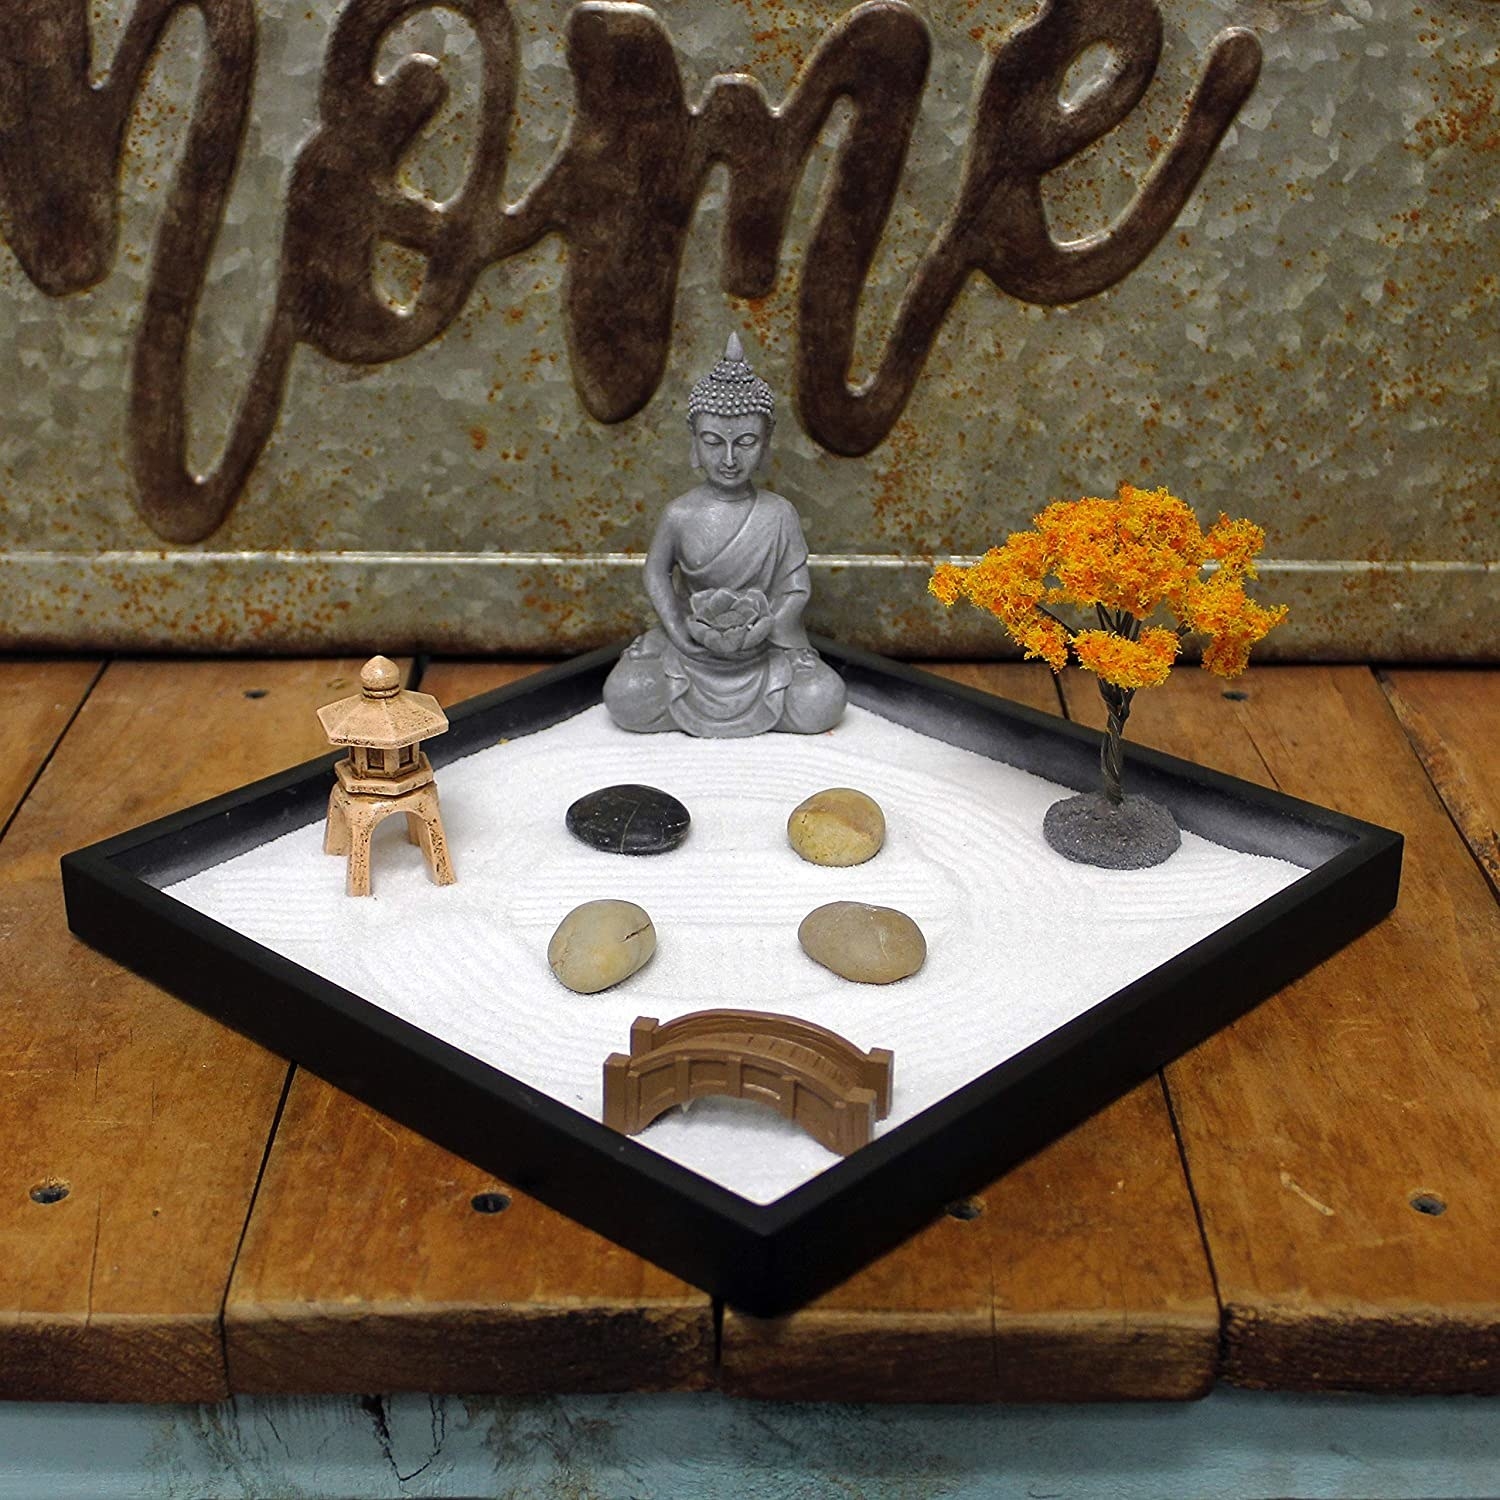 a zen garden with stones, sand, and a Buddha statue